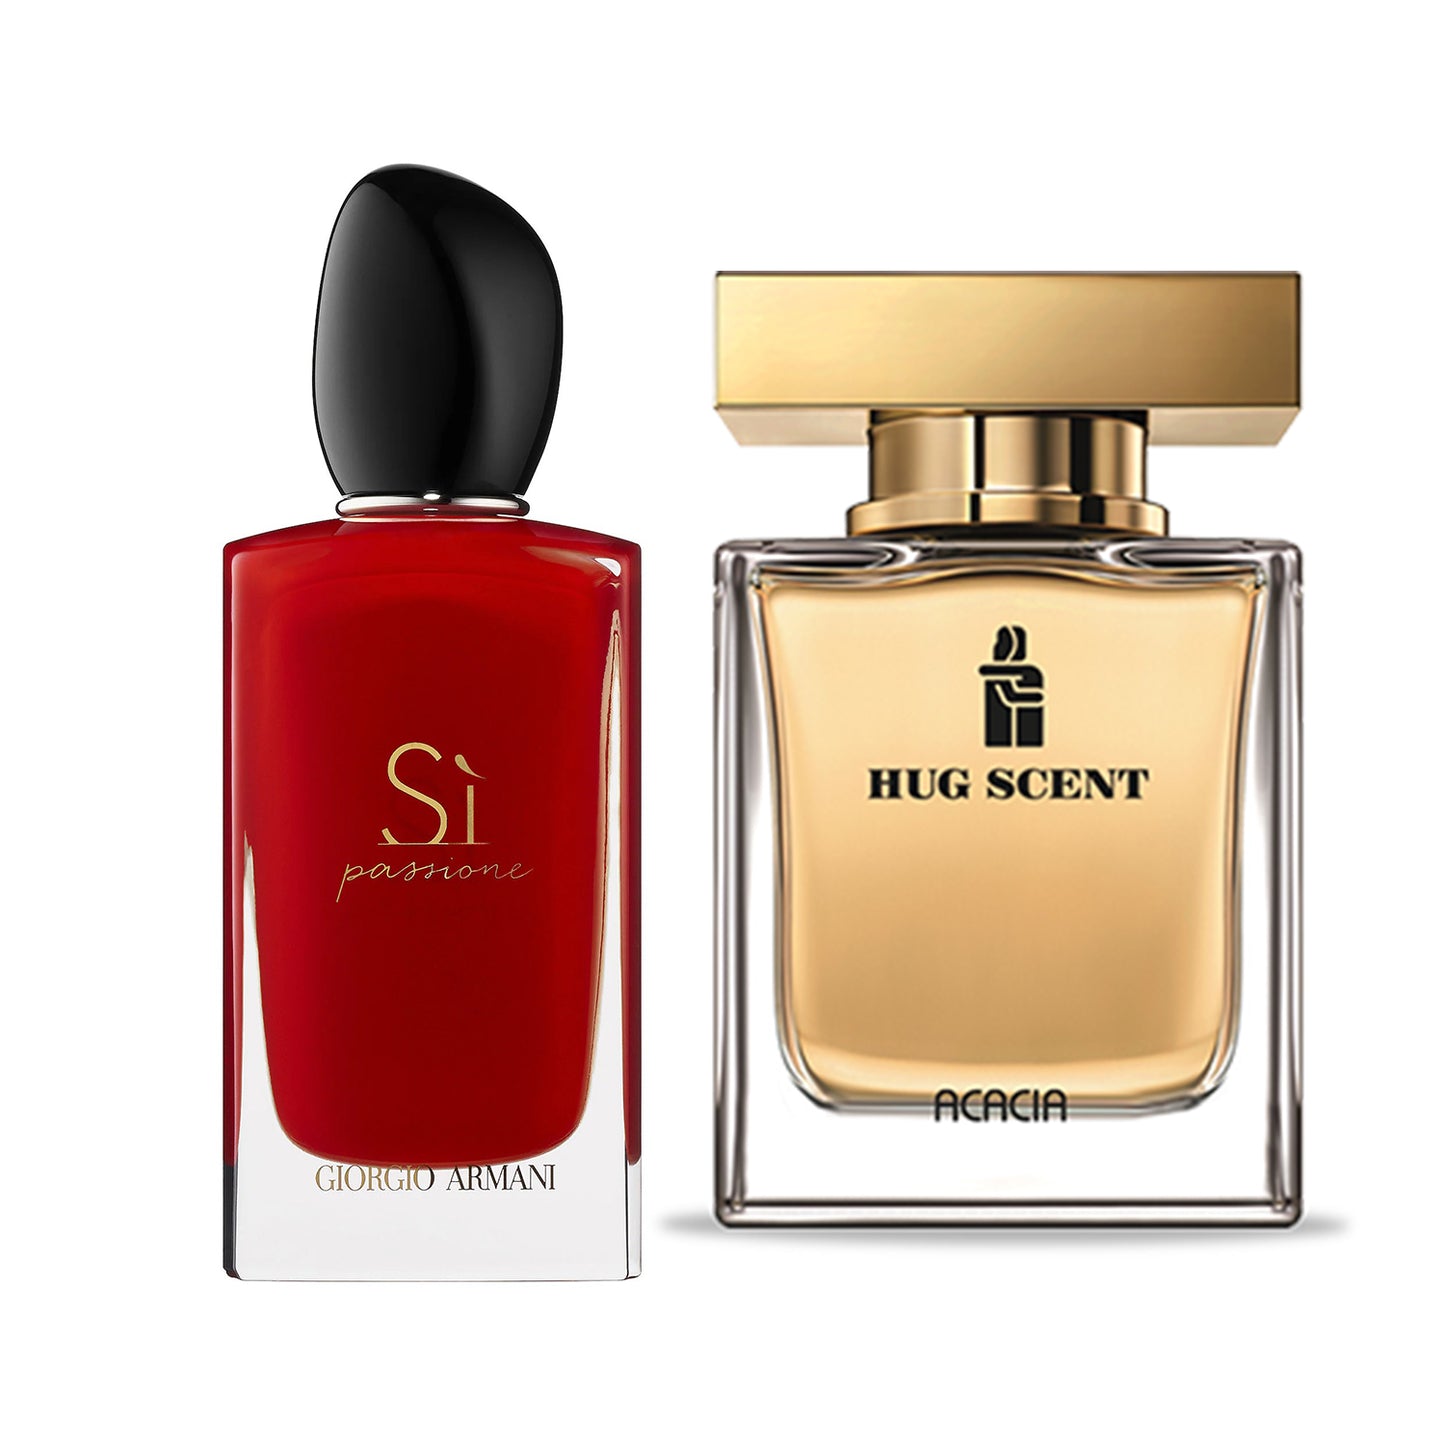 Si Passion Red + Hug Scent